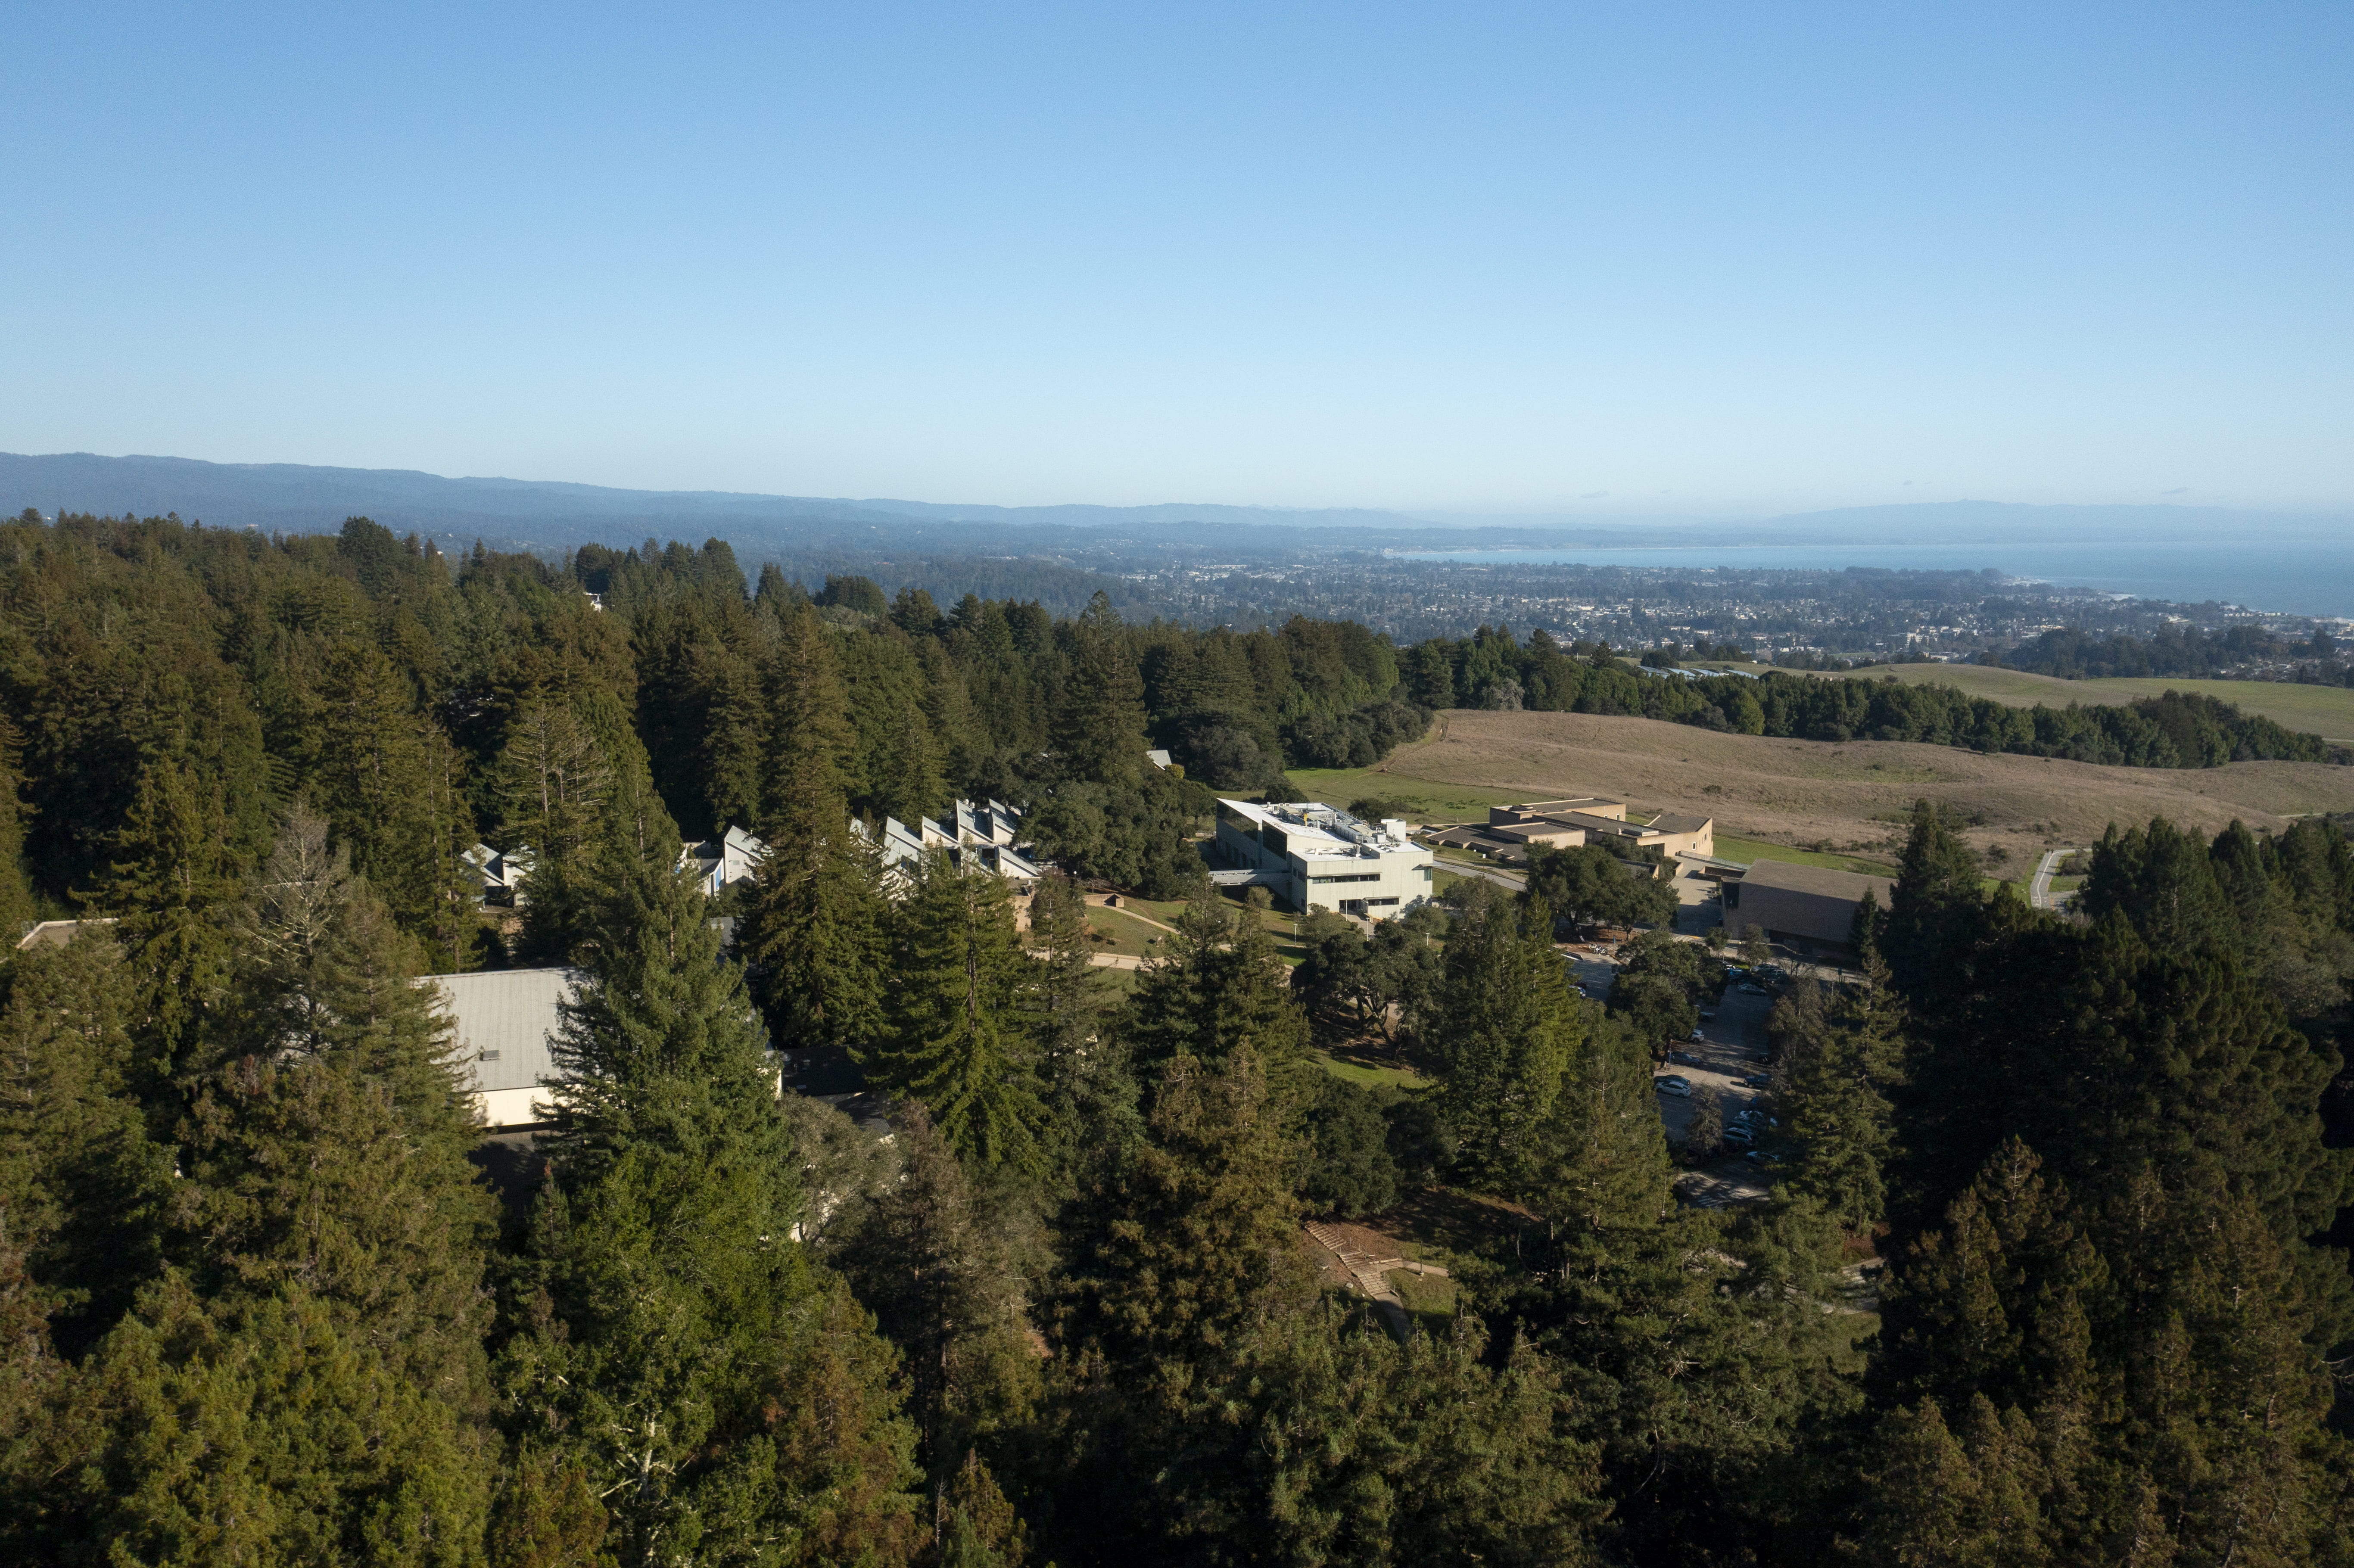 Arts Hill from the air with the Santa Cruz and the Monterey Bay seen in the background